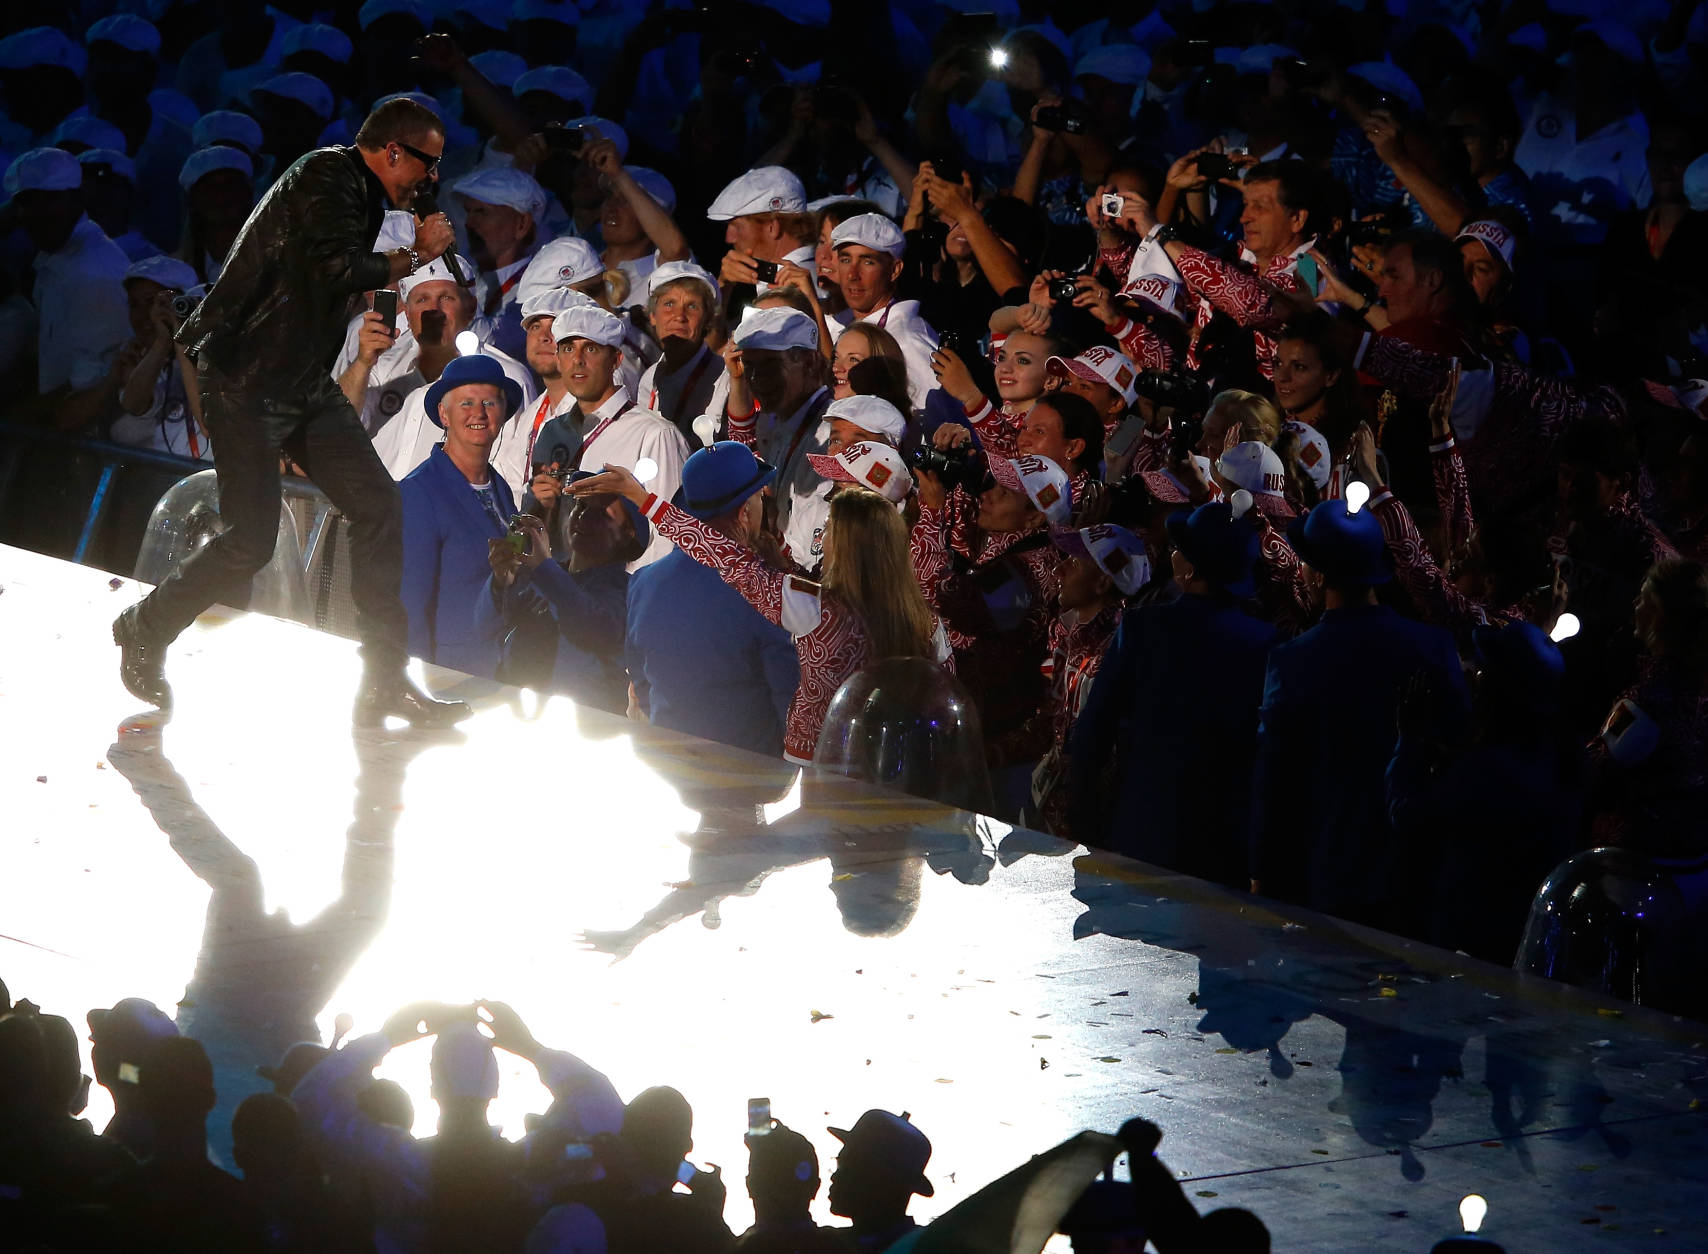 LONDON, ENGLAND - AUGUST 12:  George Michael performs during the Closing Ceremony on Day 16 of the London 2012 Olympic Games at Olympic Stadium on August 12, 2012 in London, England.  (Photo by Jamie Squire/Getty Images)